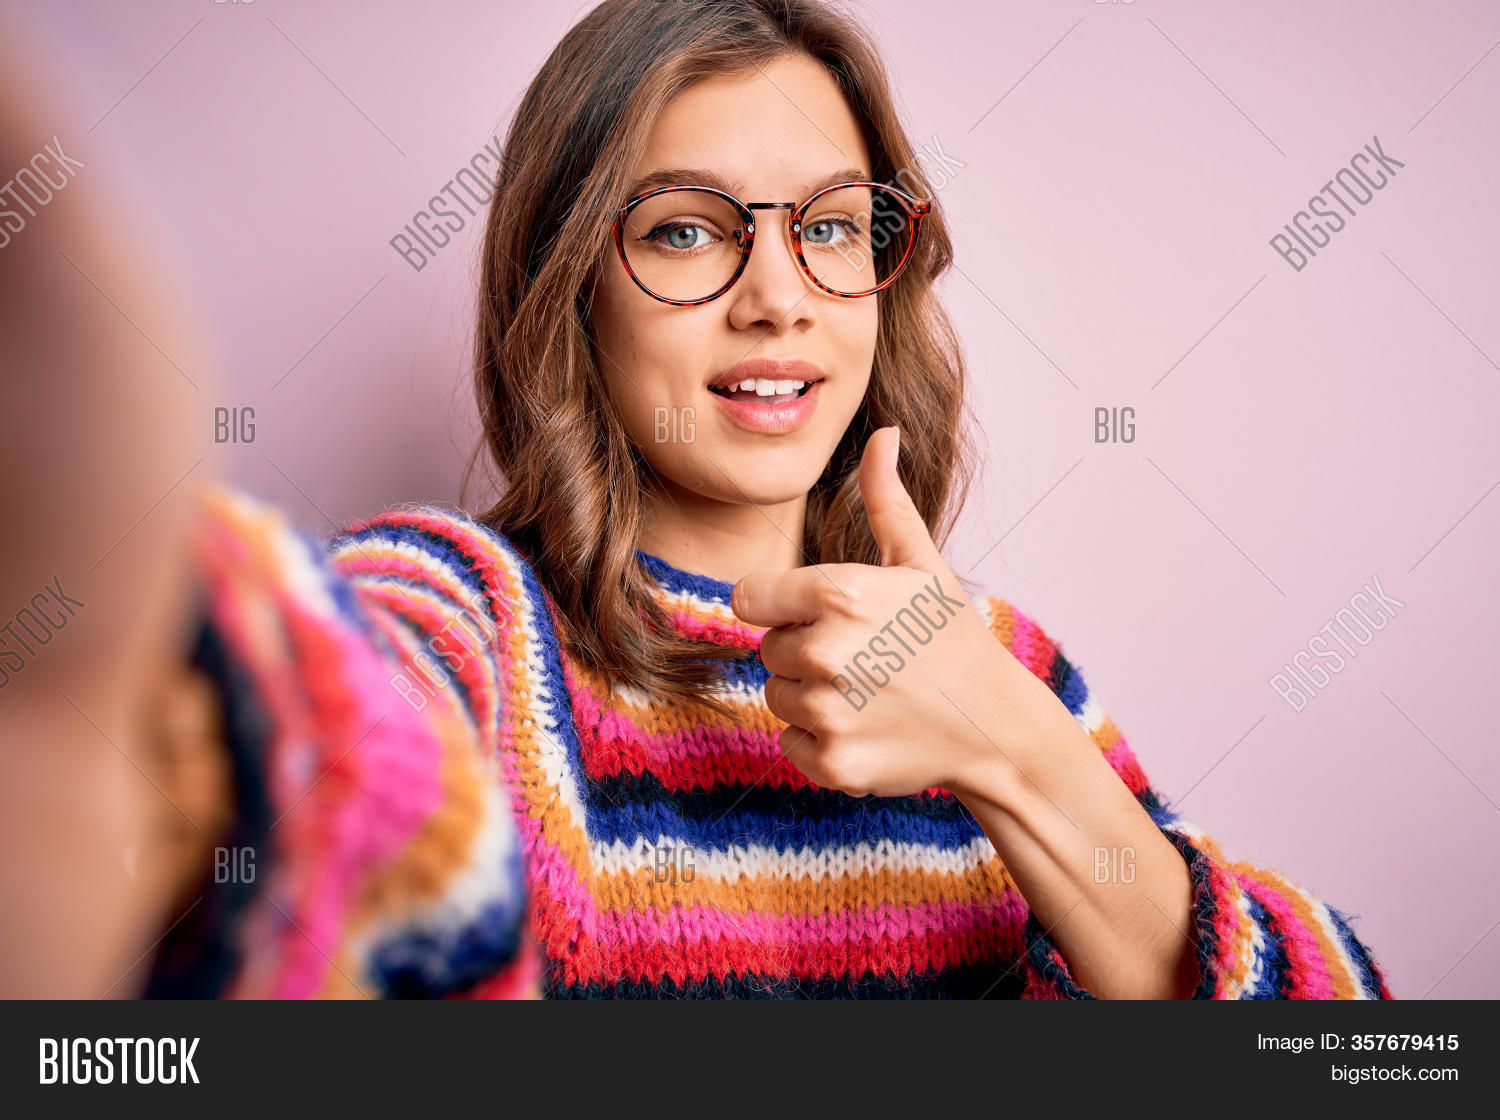 girl with thumbs up selfie